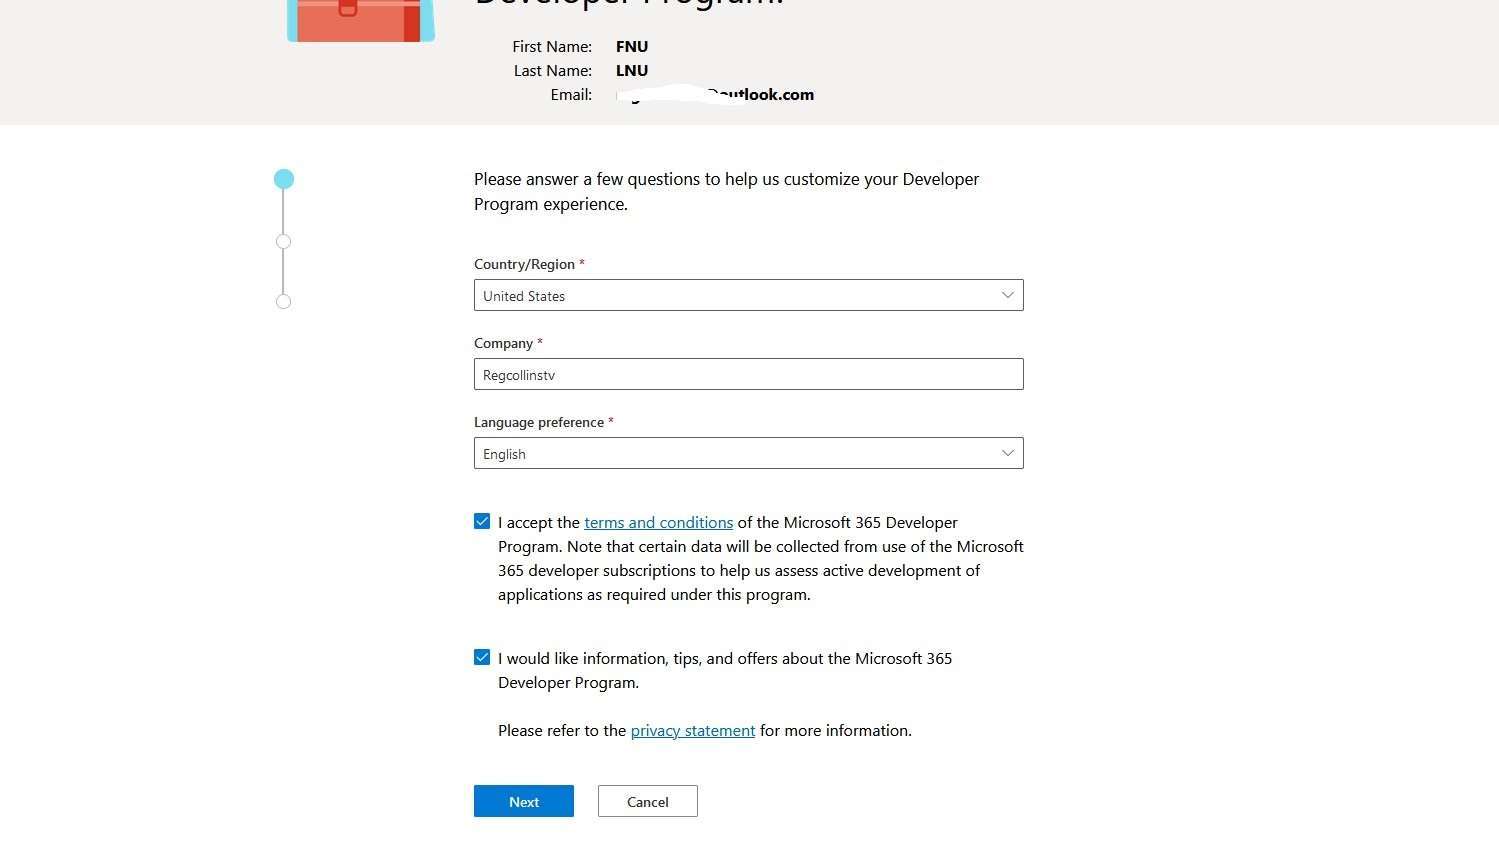 upgrade office 365 from e1 to e3